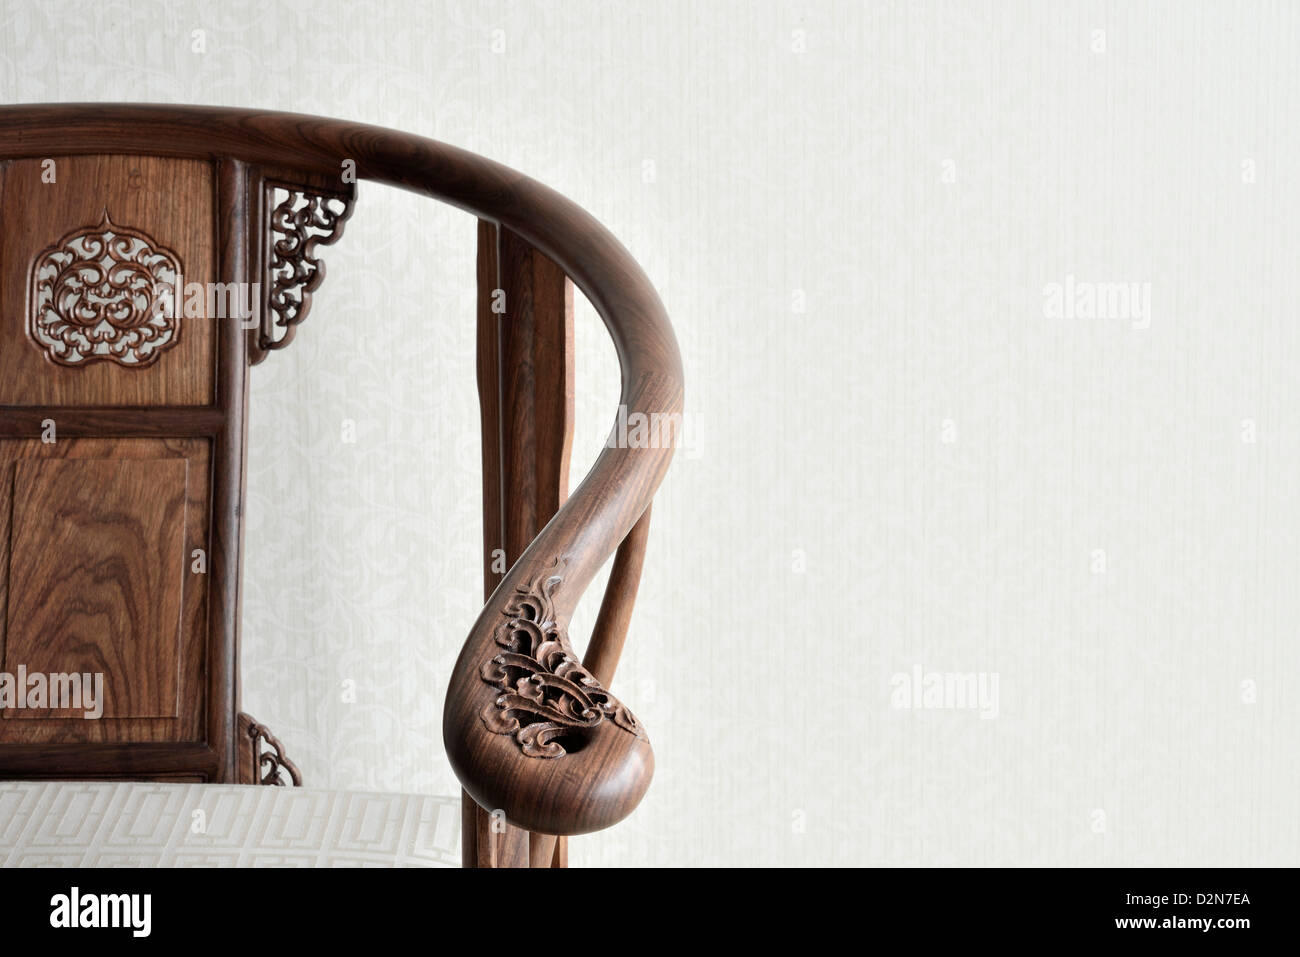 Traditional Chinese wooden chair with decorative flower carving on it. Shanghai, China. Stock Photo